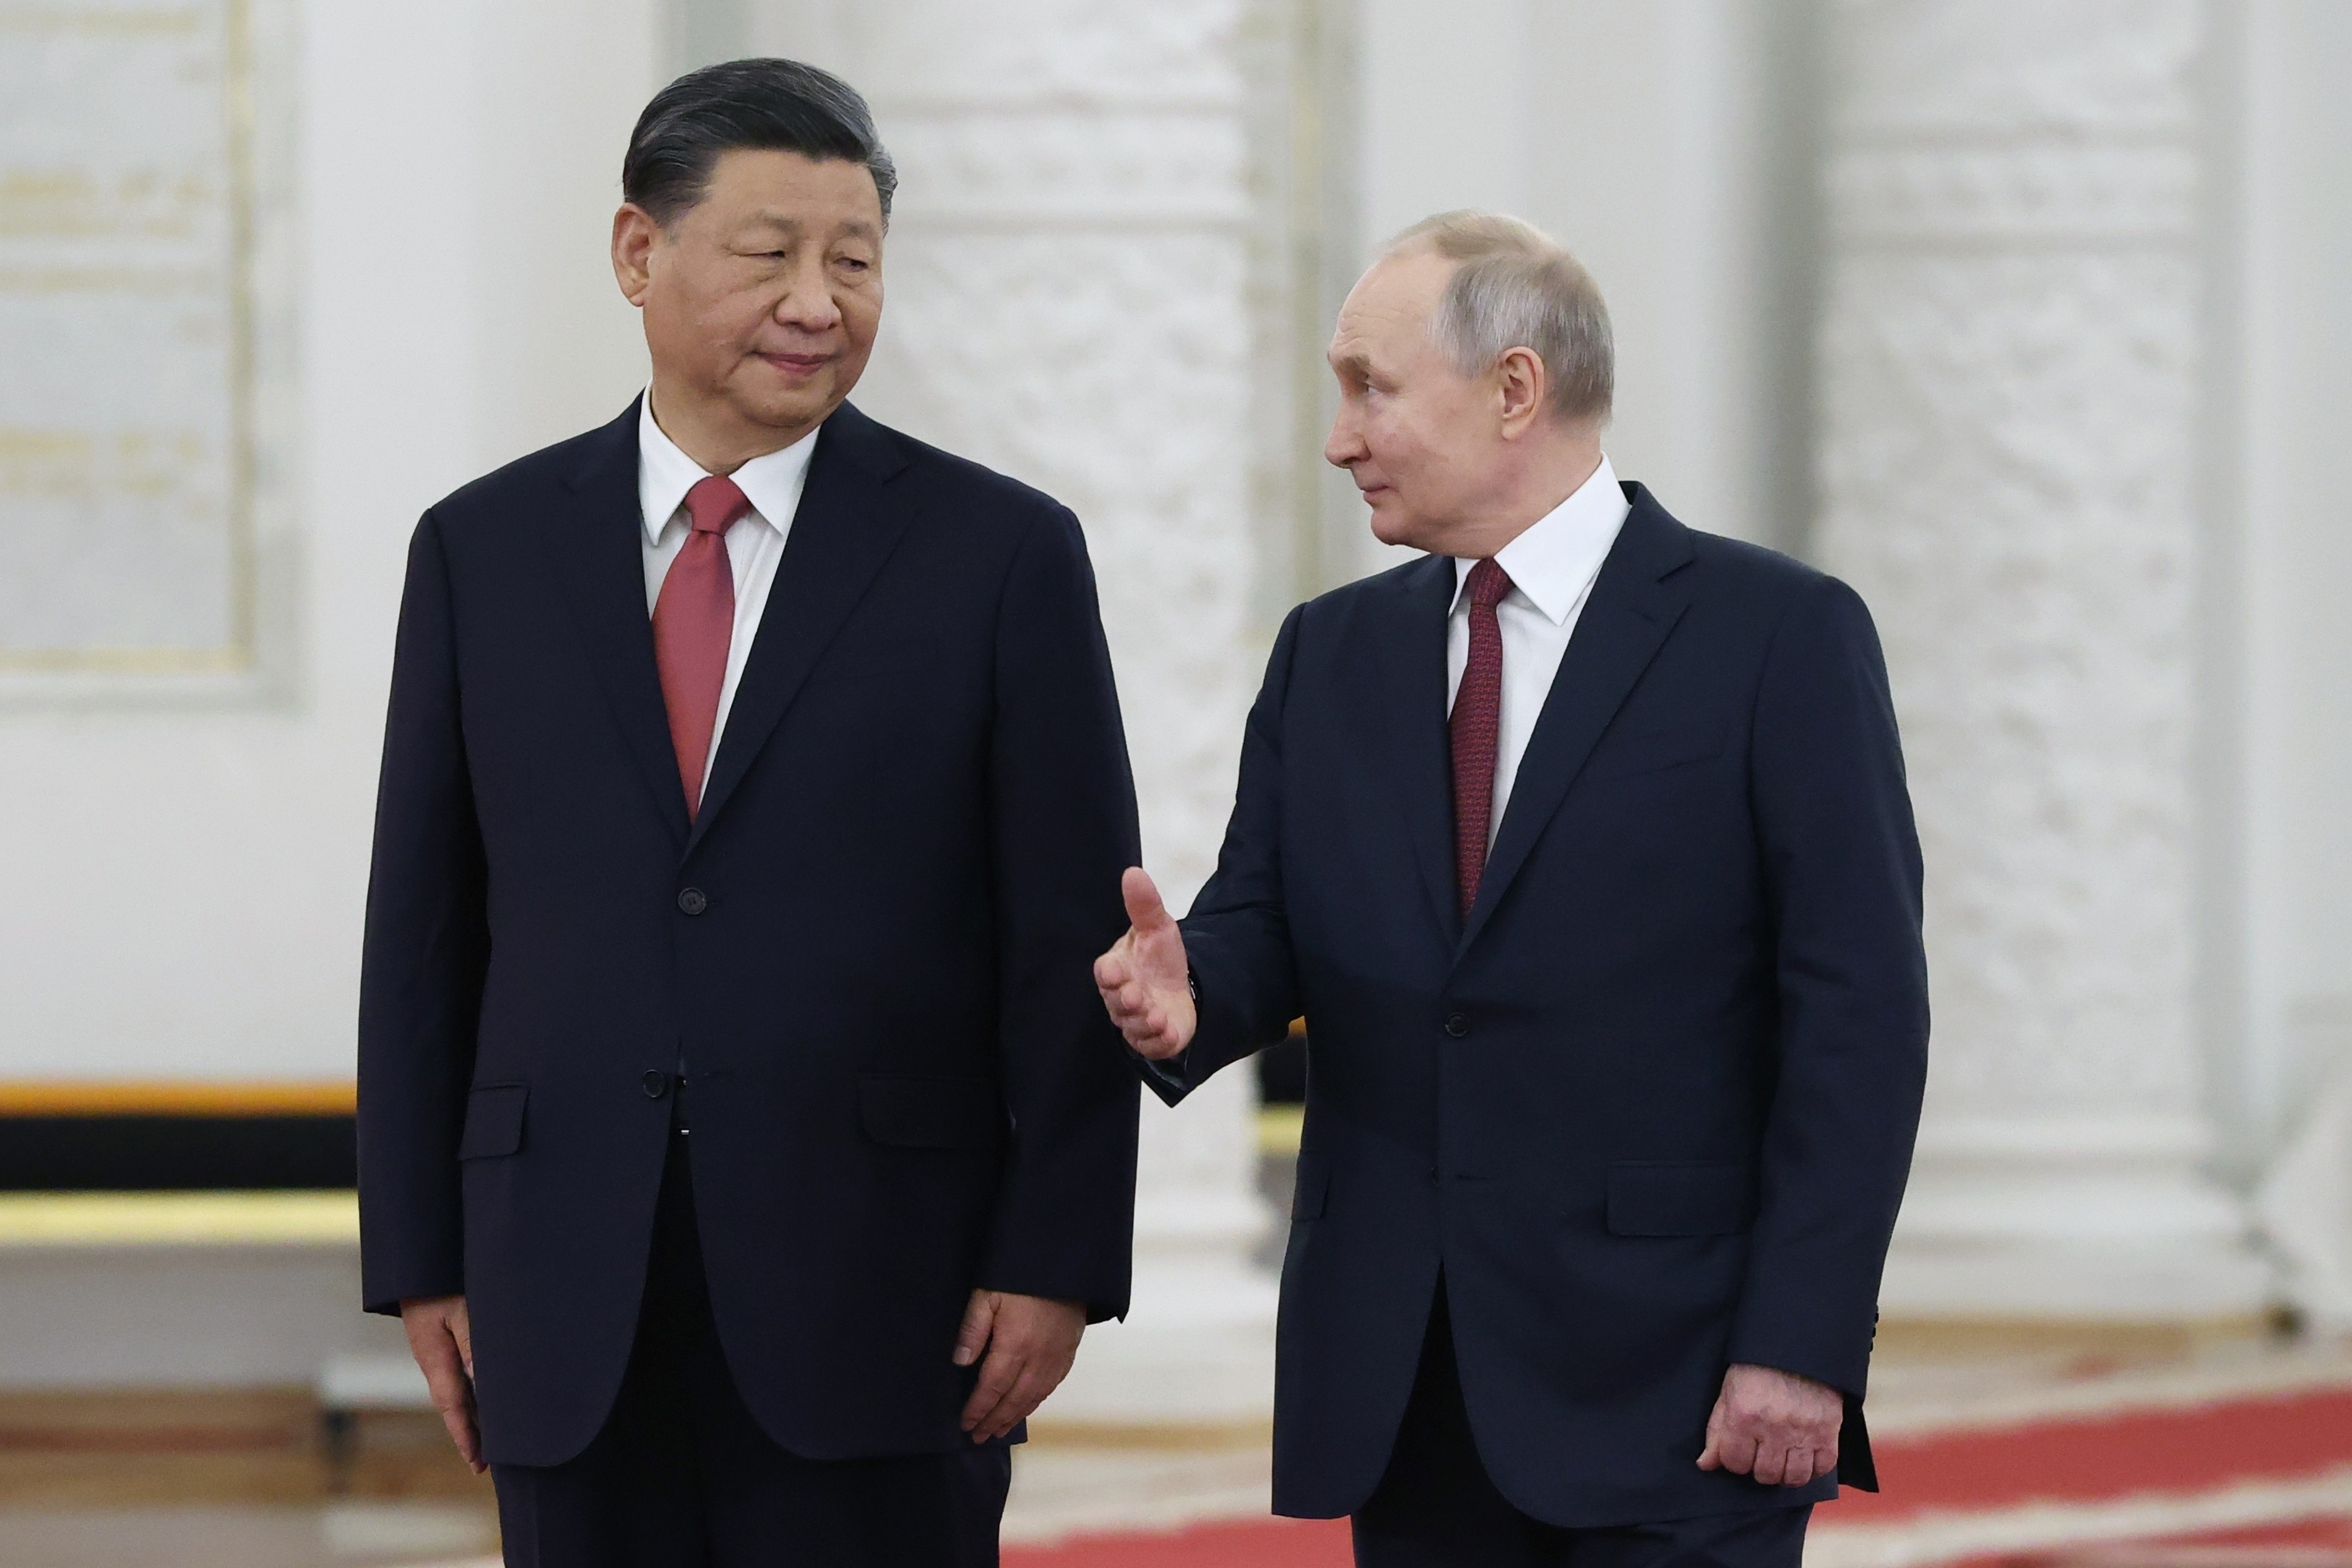 Chinese leader Xi Jinping and Russian President Vladimir Putin meet in Moscow on March 21. Photo: AP